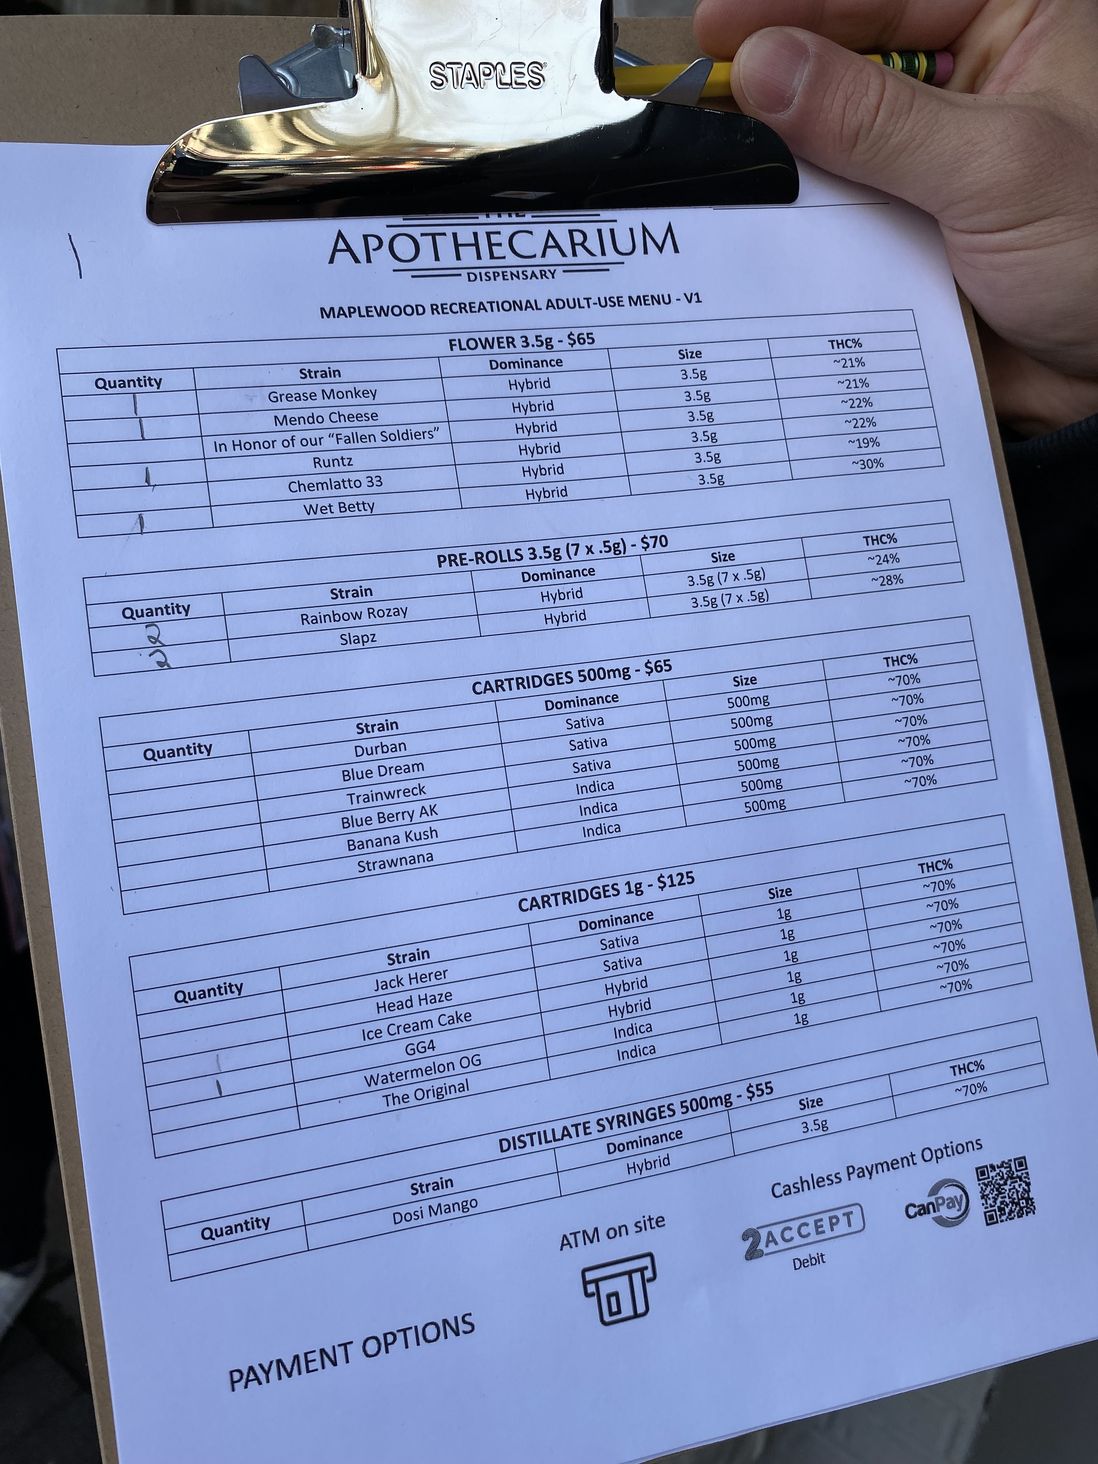 A menu of products with prices at the Apothecarium dispensary in Maplewood, April 21st, 2022.